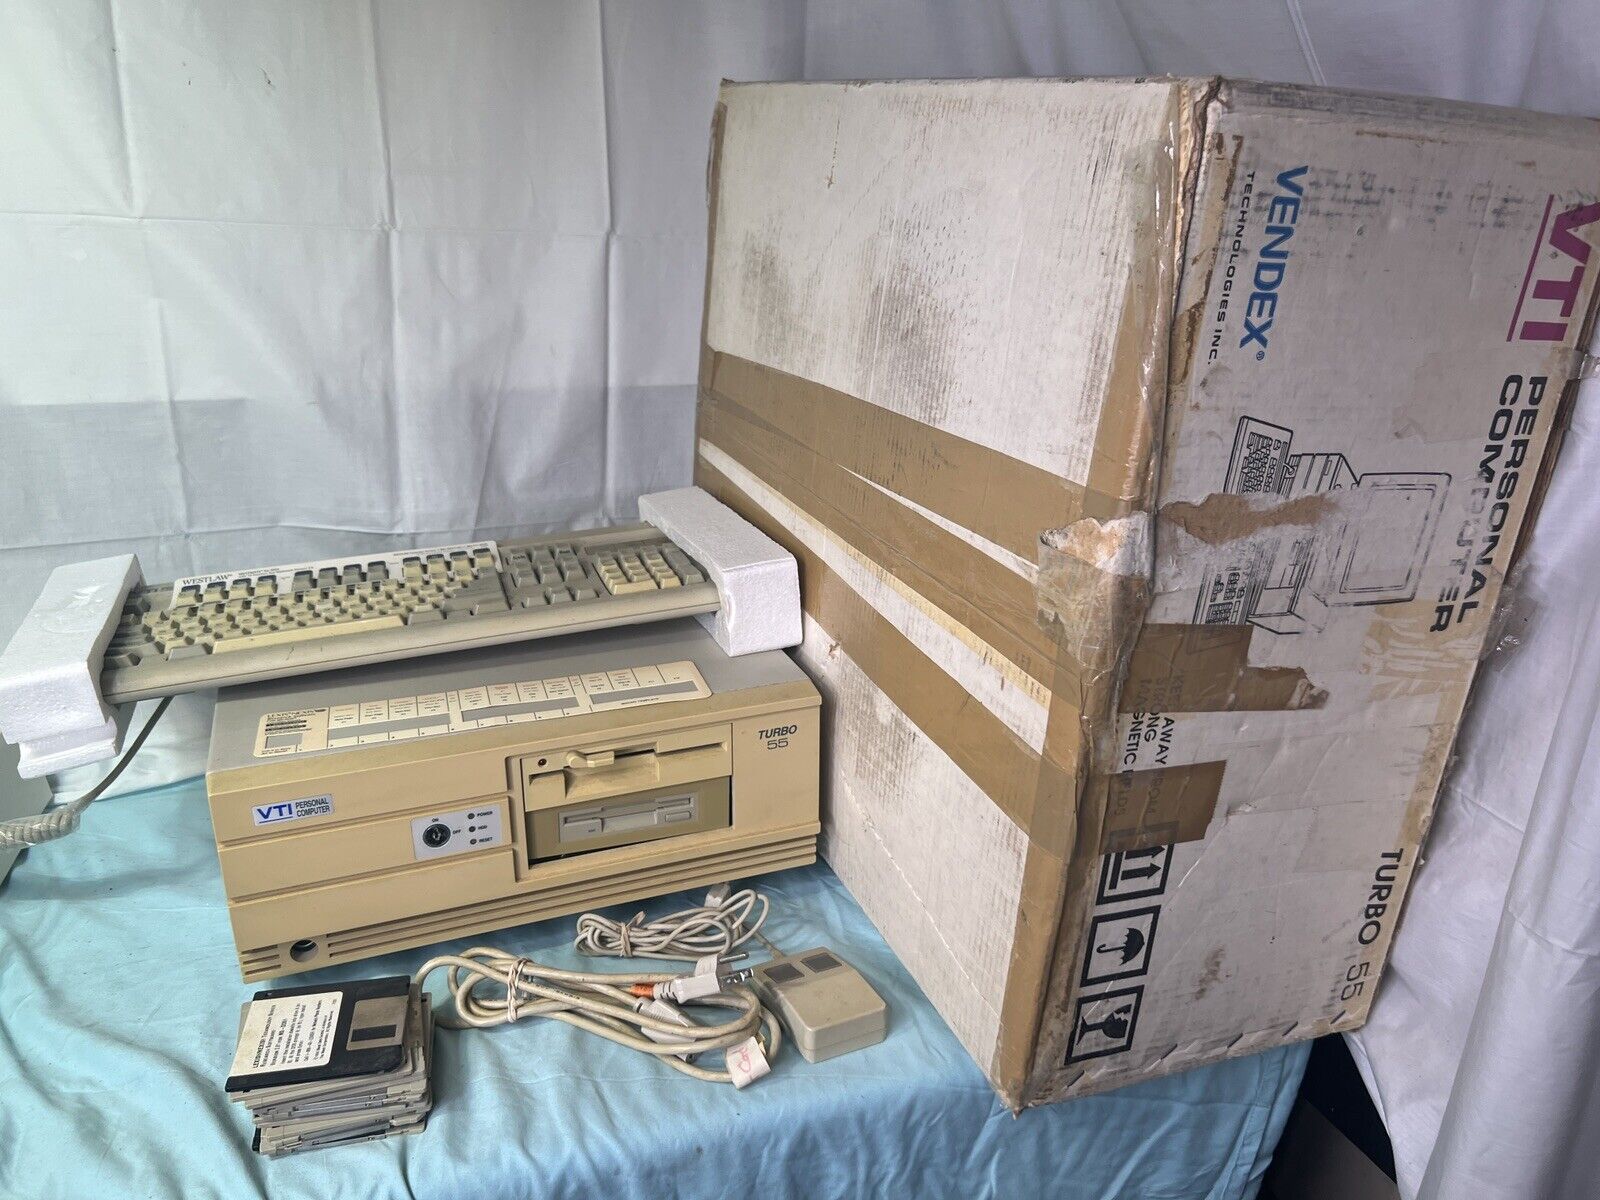 VTI Turbo 55 Computer w/ Original Keyboard And Mouse S550 Vintage And Box